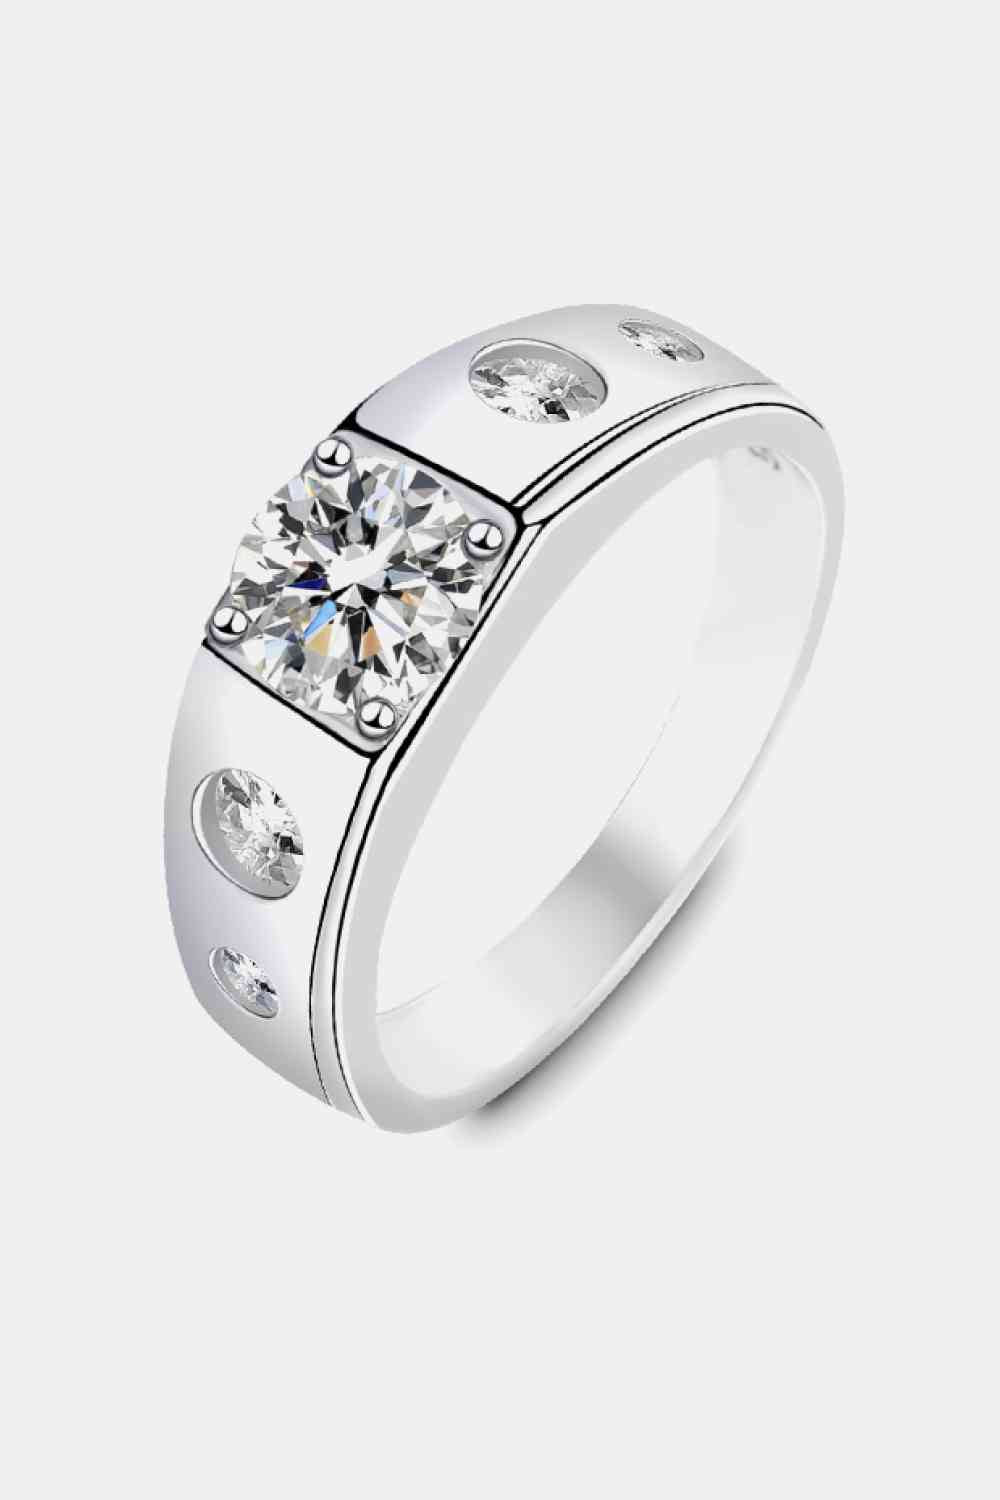 1 Carat Moissanite 925 Sterling Silver Ring - Shop Tophatter Deals, Electronics, Fashion, Jewelry, Health, Beauty, Home Decor, Free Shipping